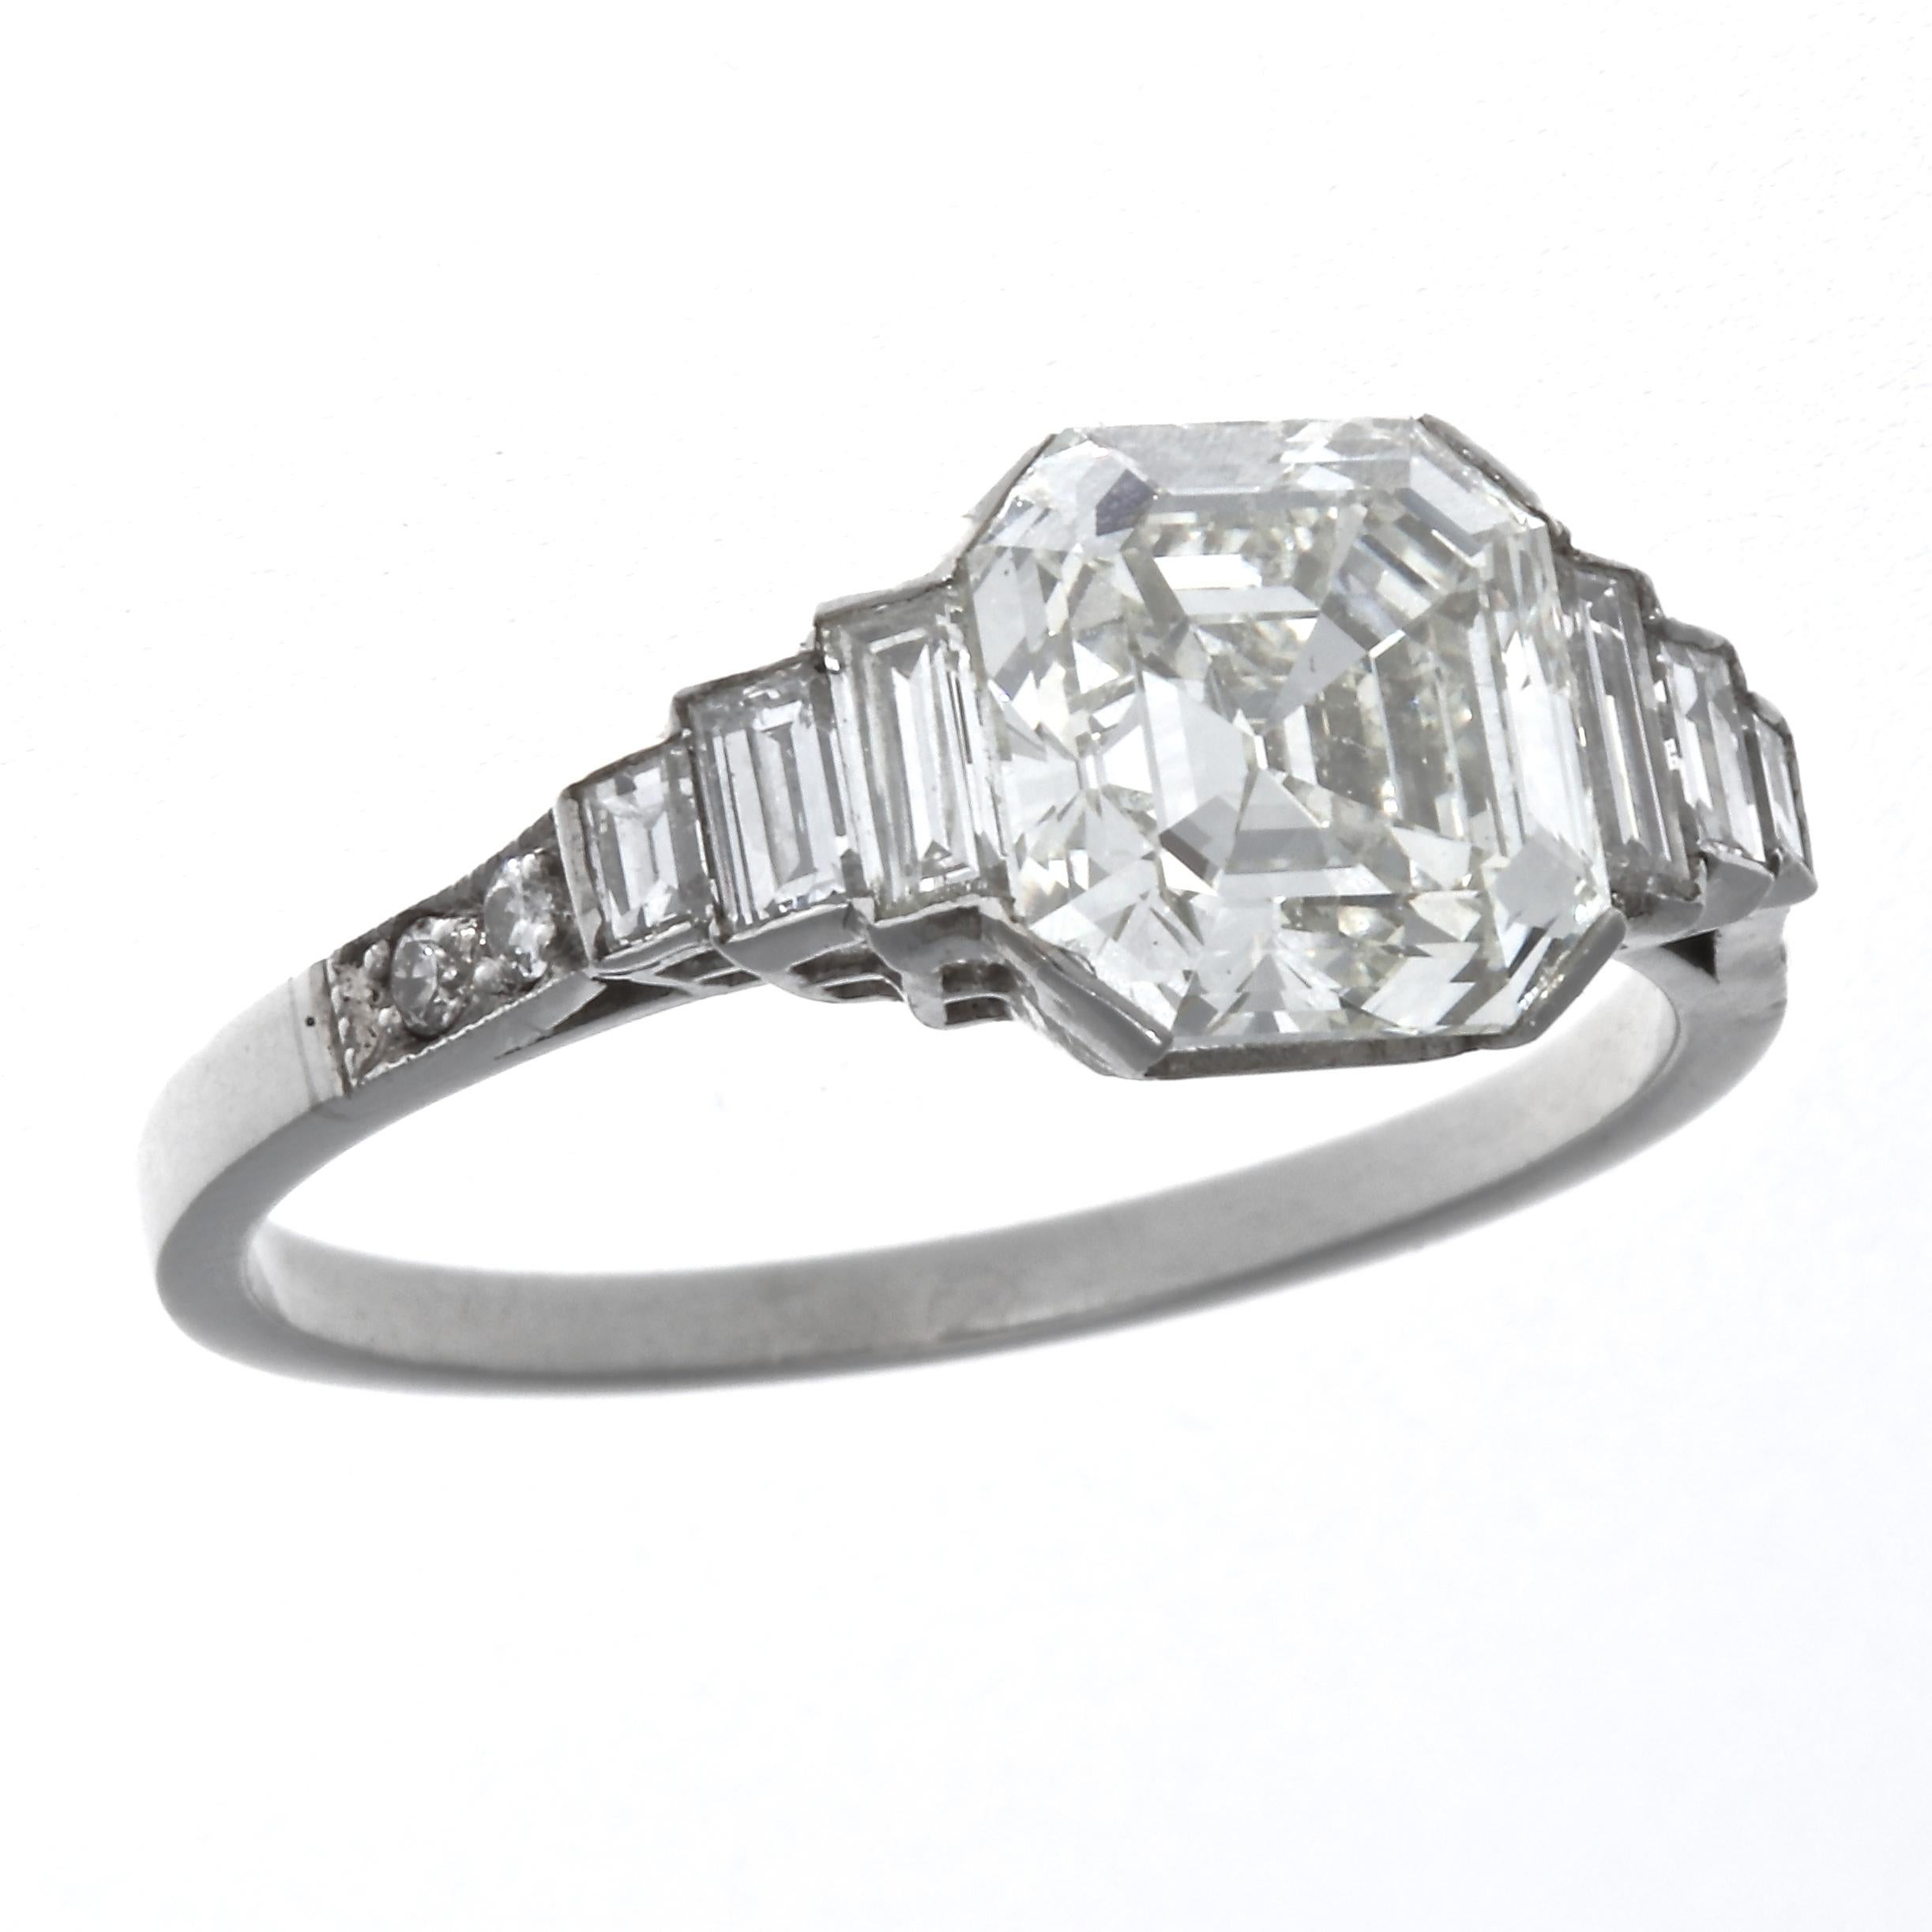 A Jack Weir & Sons creation featuring a well proportioned square emerald cut diamond that is lively and bright. Nestled in a diamond platinum ring that brings out all the fine qualities of the diamond. GIA graded as 2.03 carats, K color, VS2